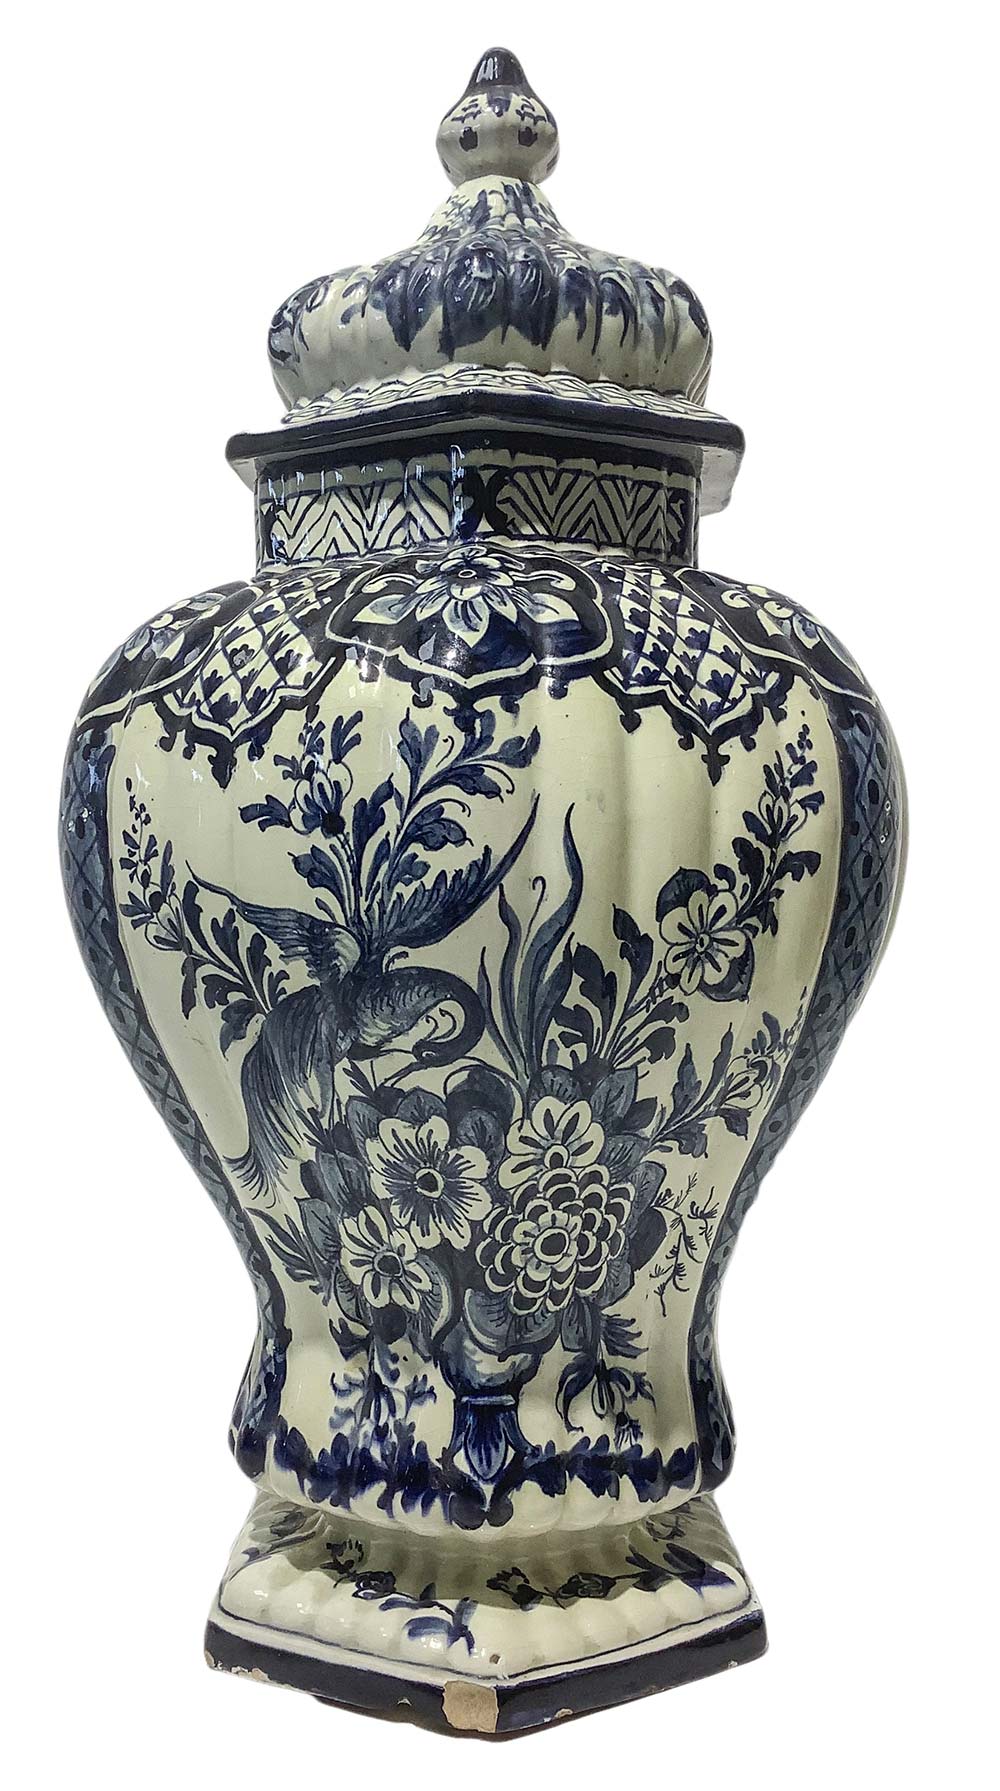 White majolica potiche with blue decorations, Delft. Dated and signed at the base Corint 1799.